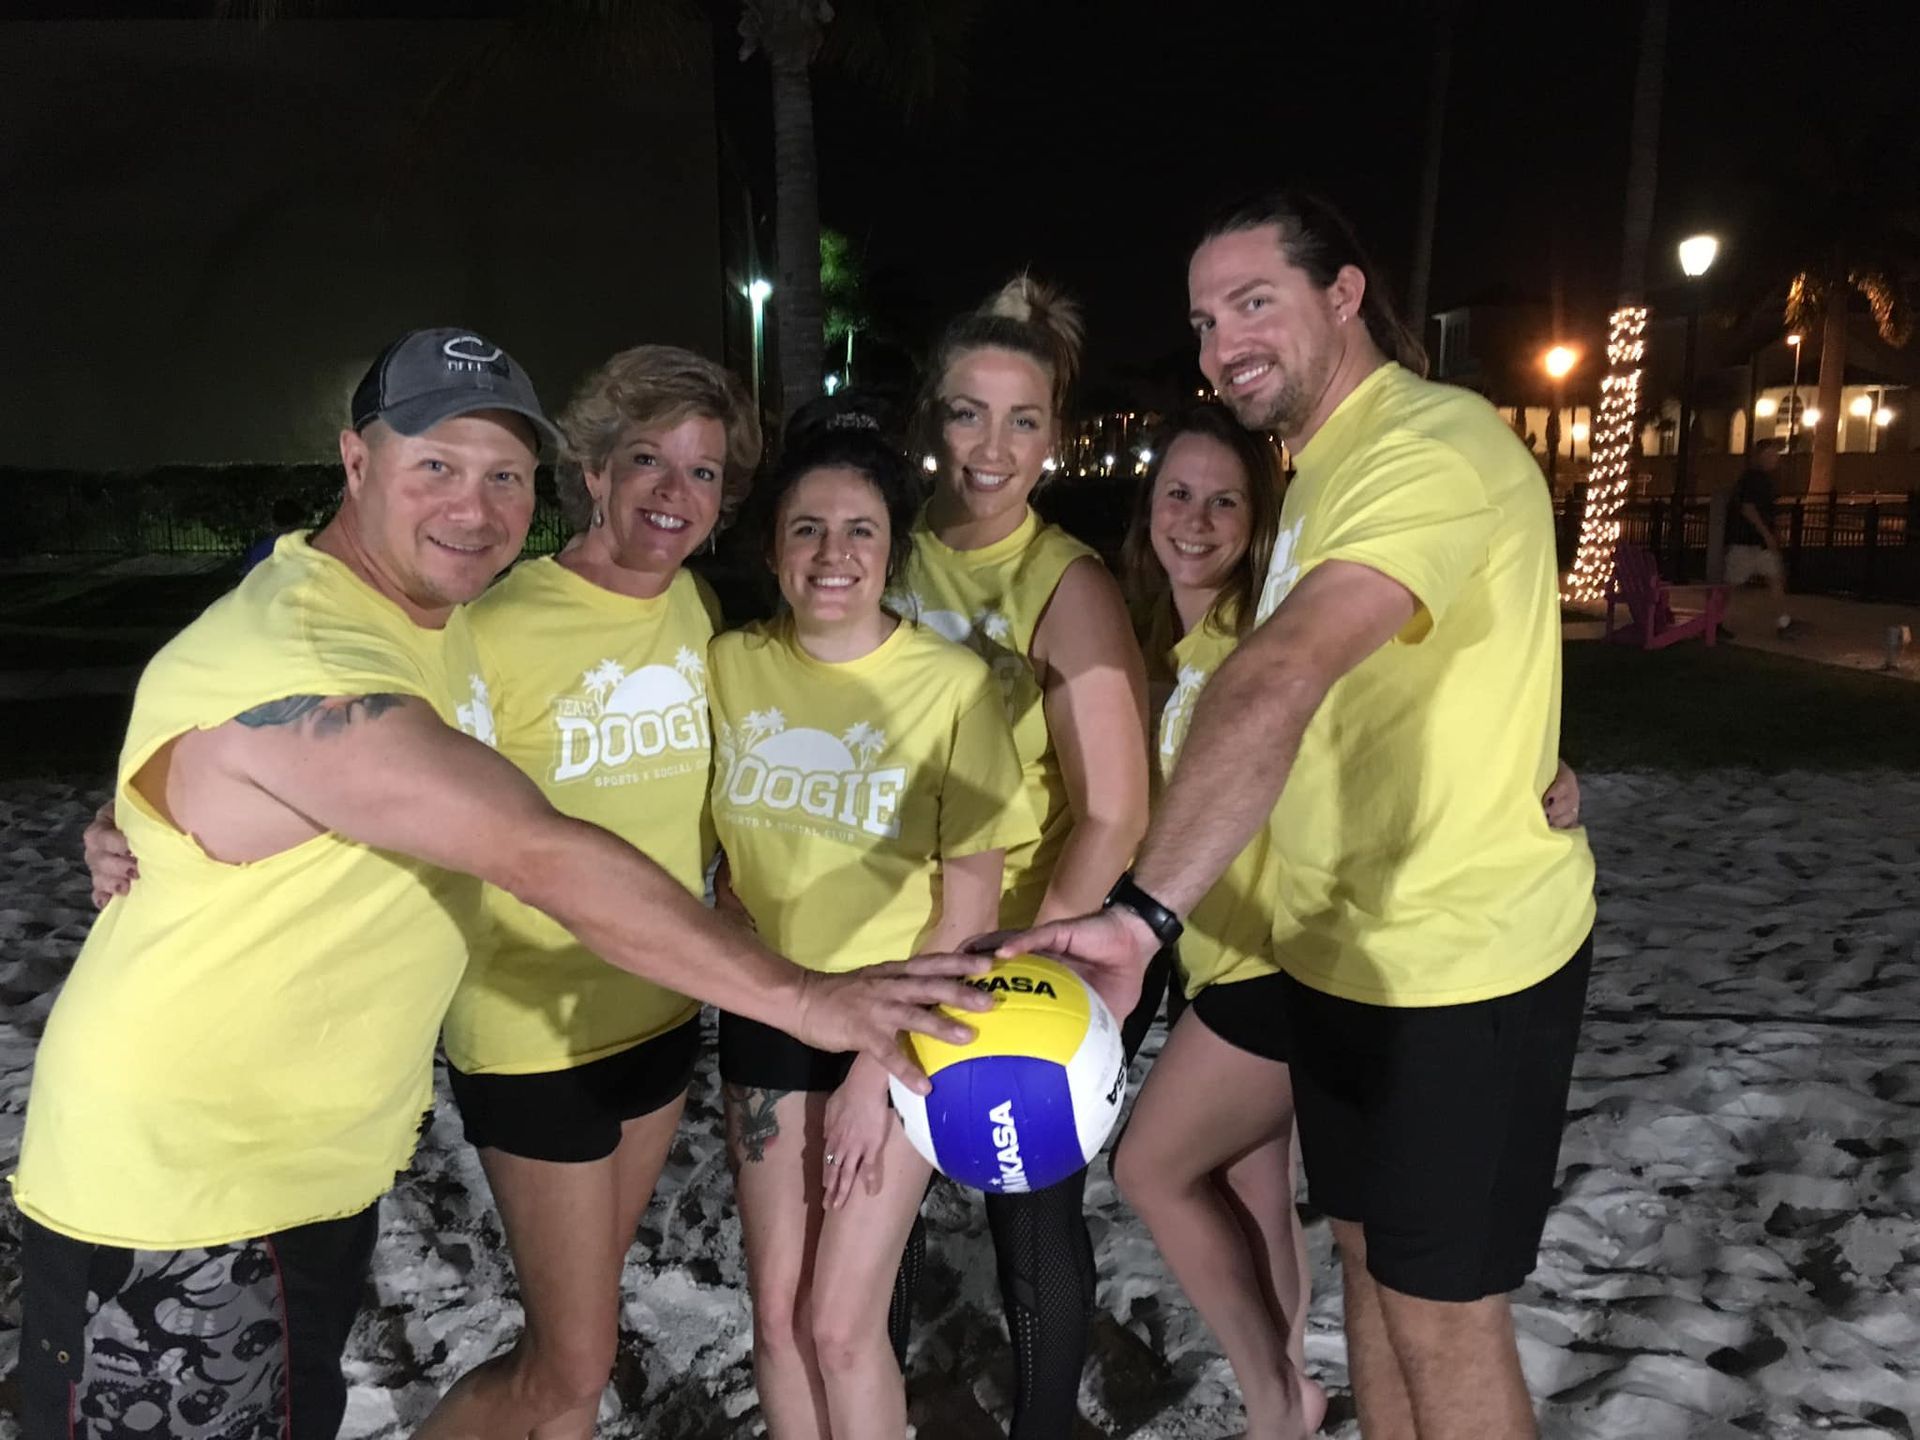 People in Yellow Shirts Holding a Volleyball Ball — North Port, FL — Team Doogie